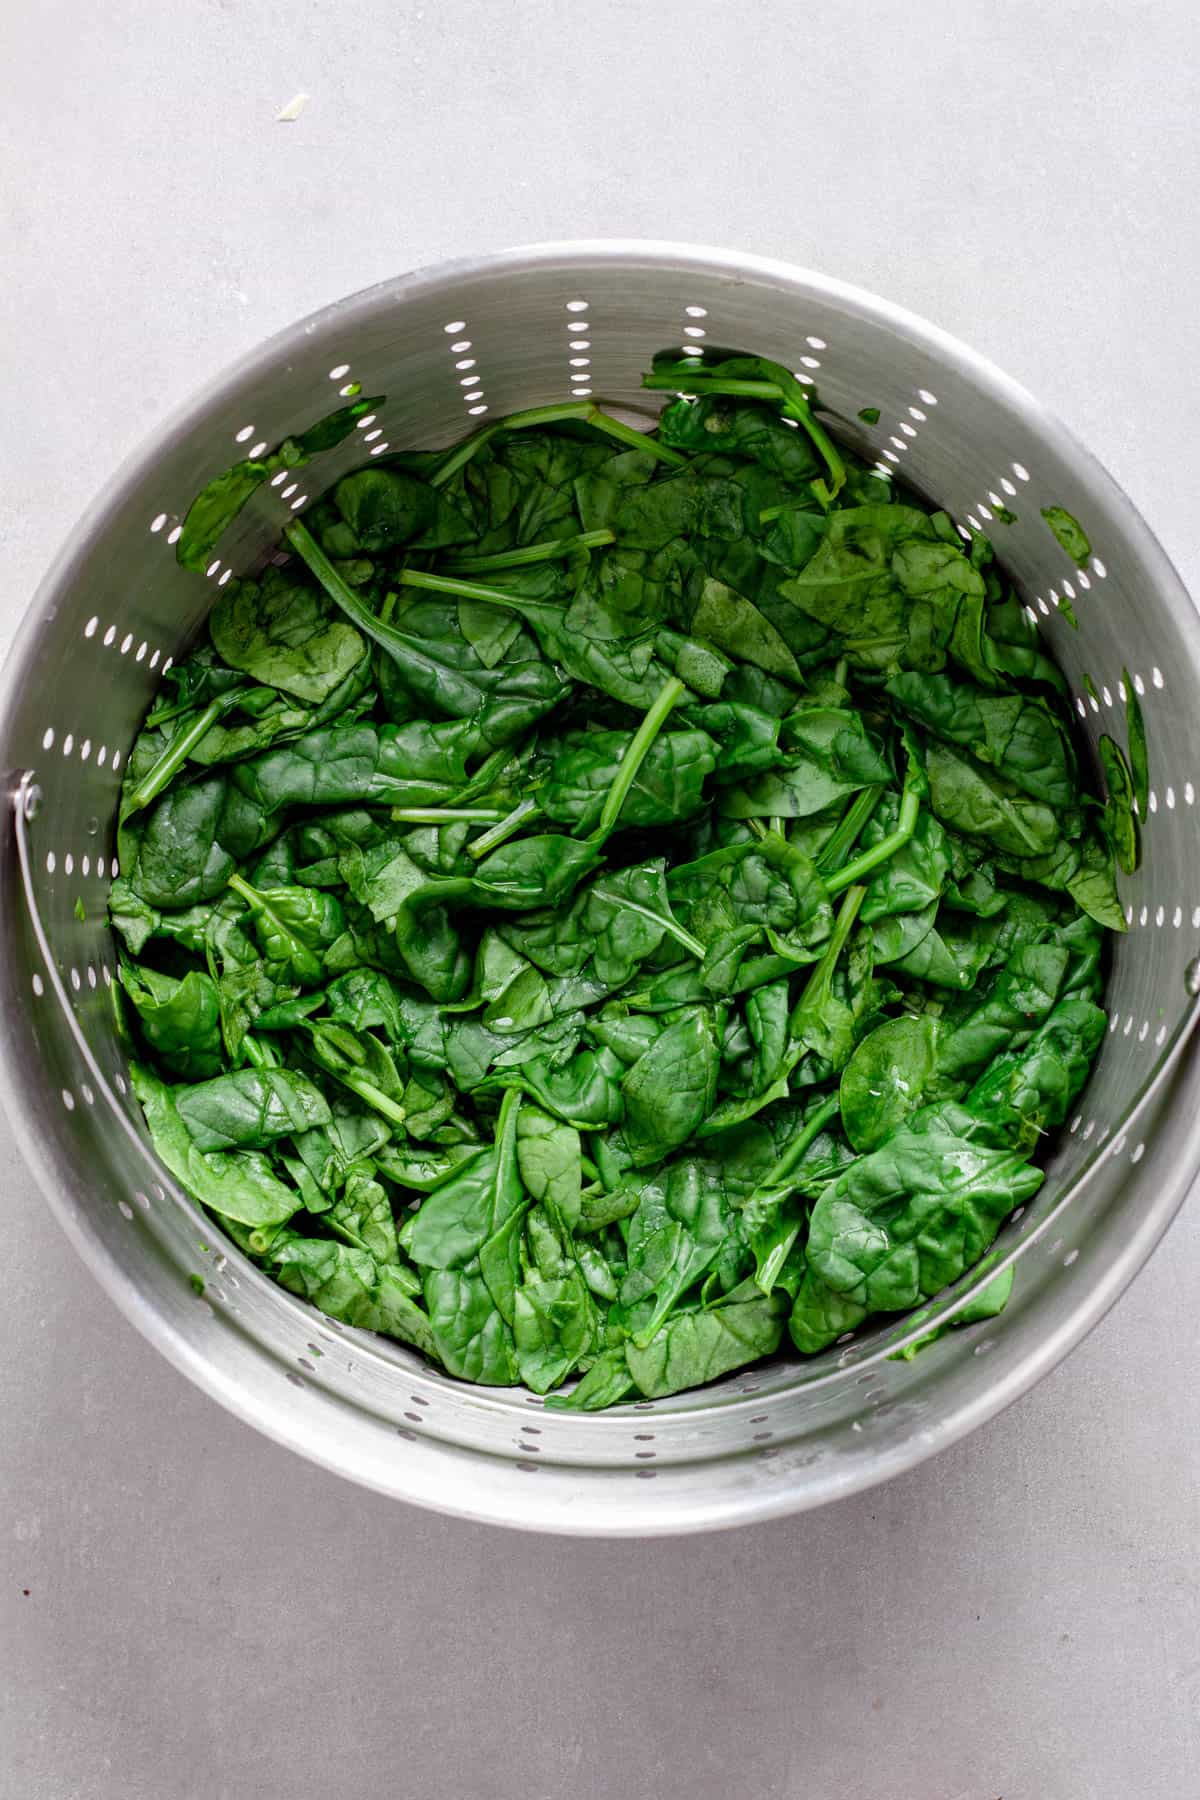 Wilted spinach in a strainer on a gray table.